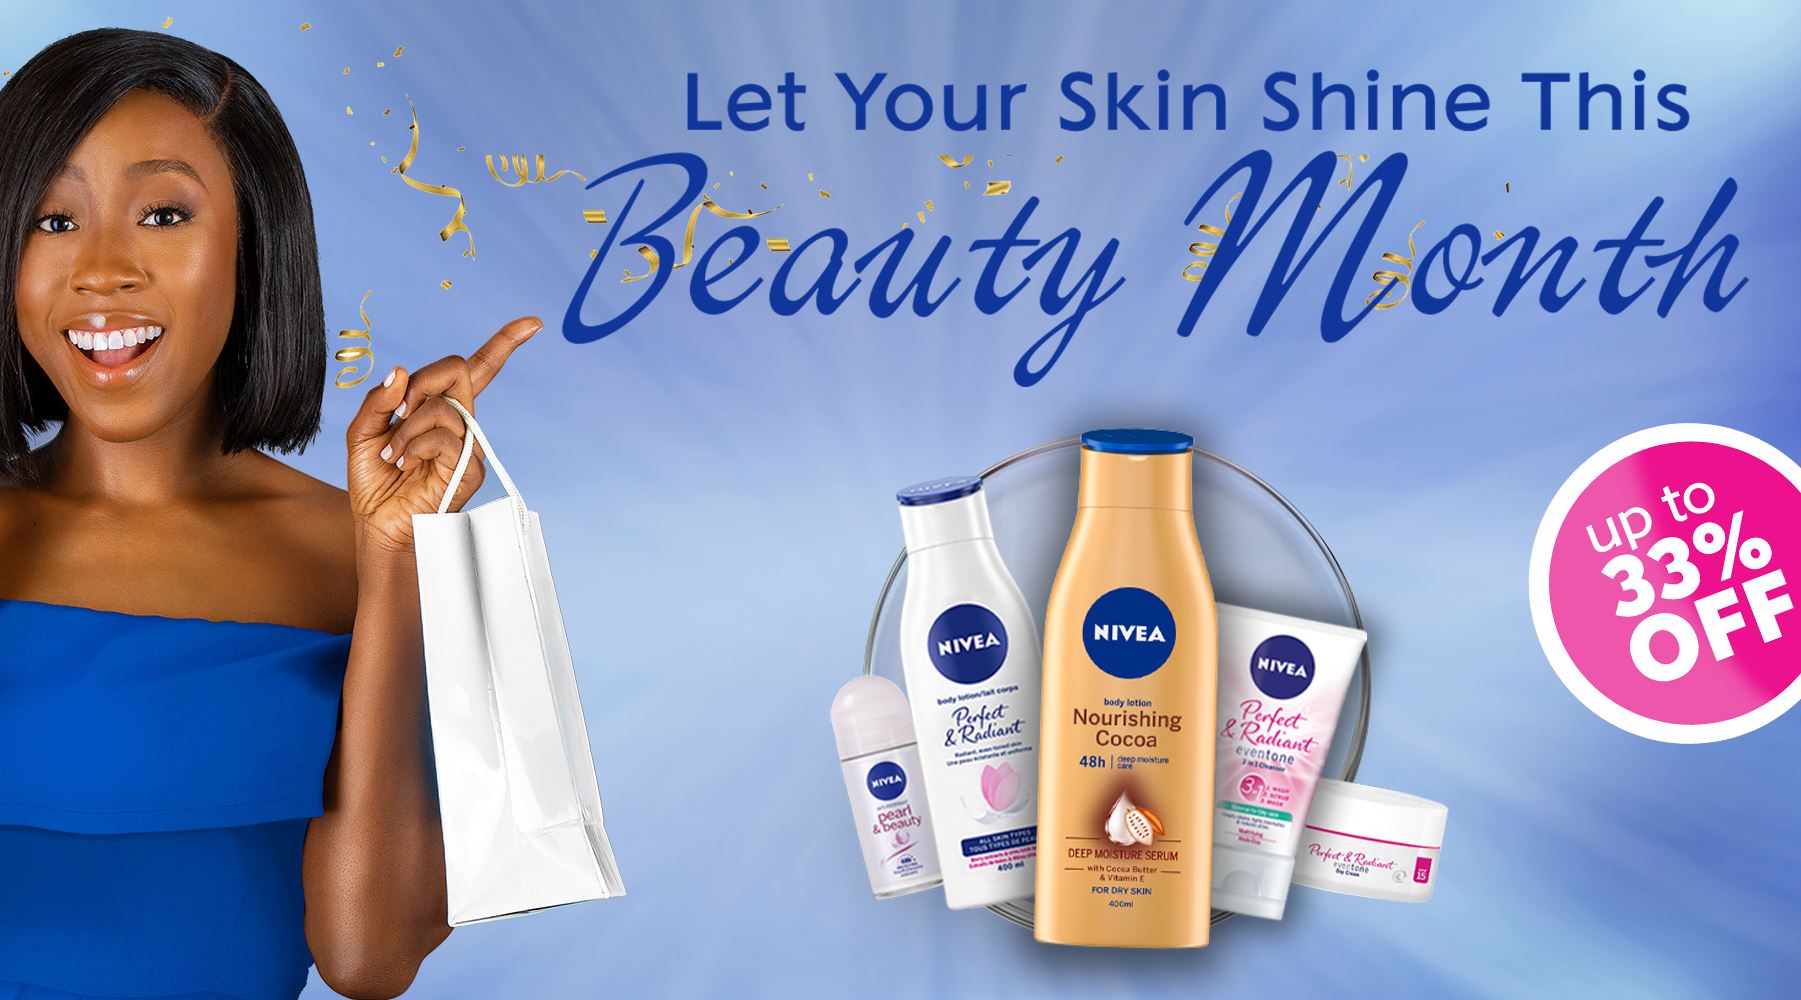 33% off! Beauty Month - #MyPowerWithNIVEA